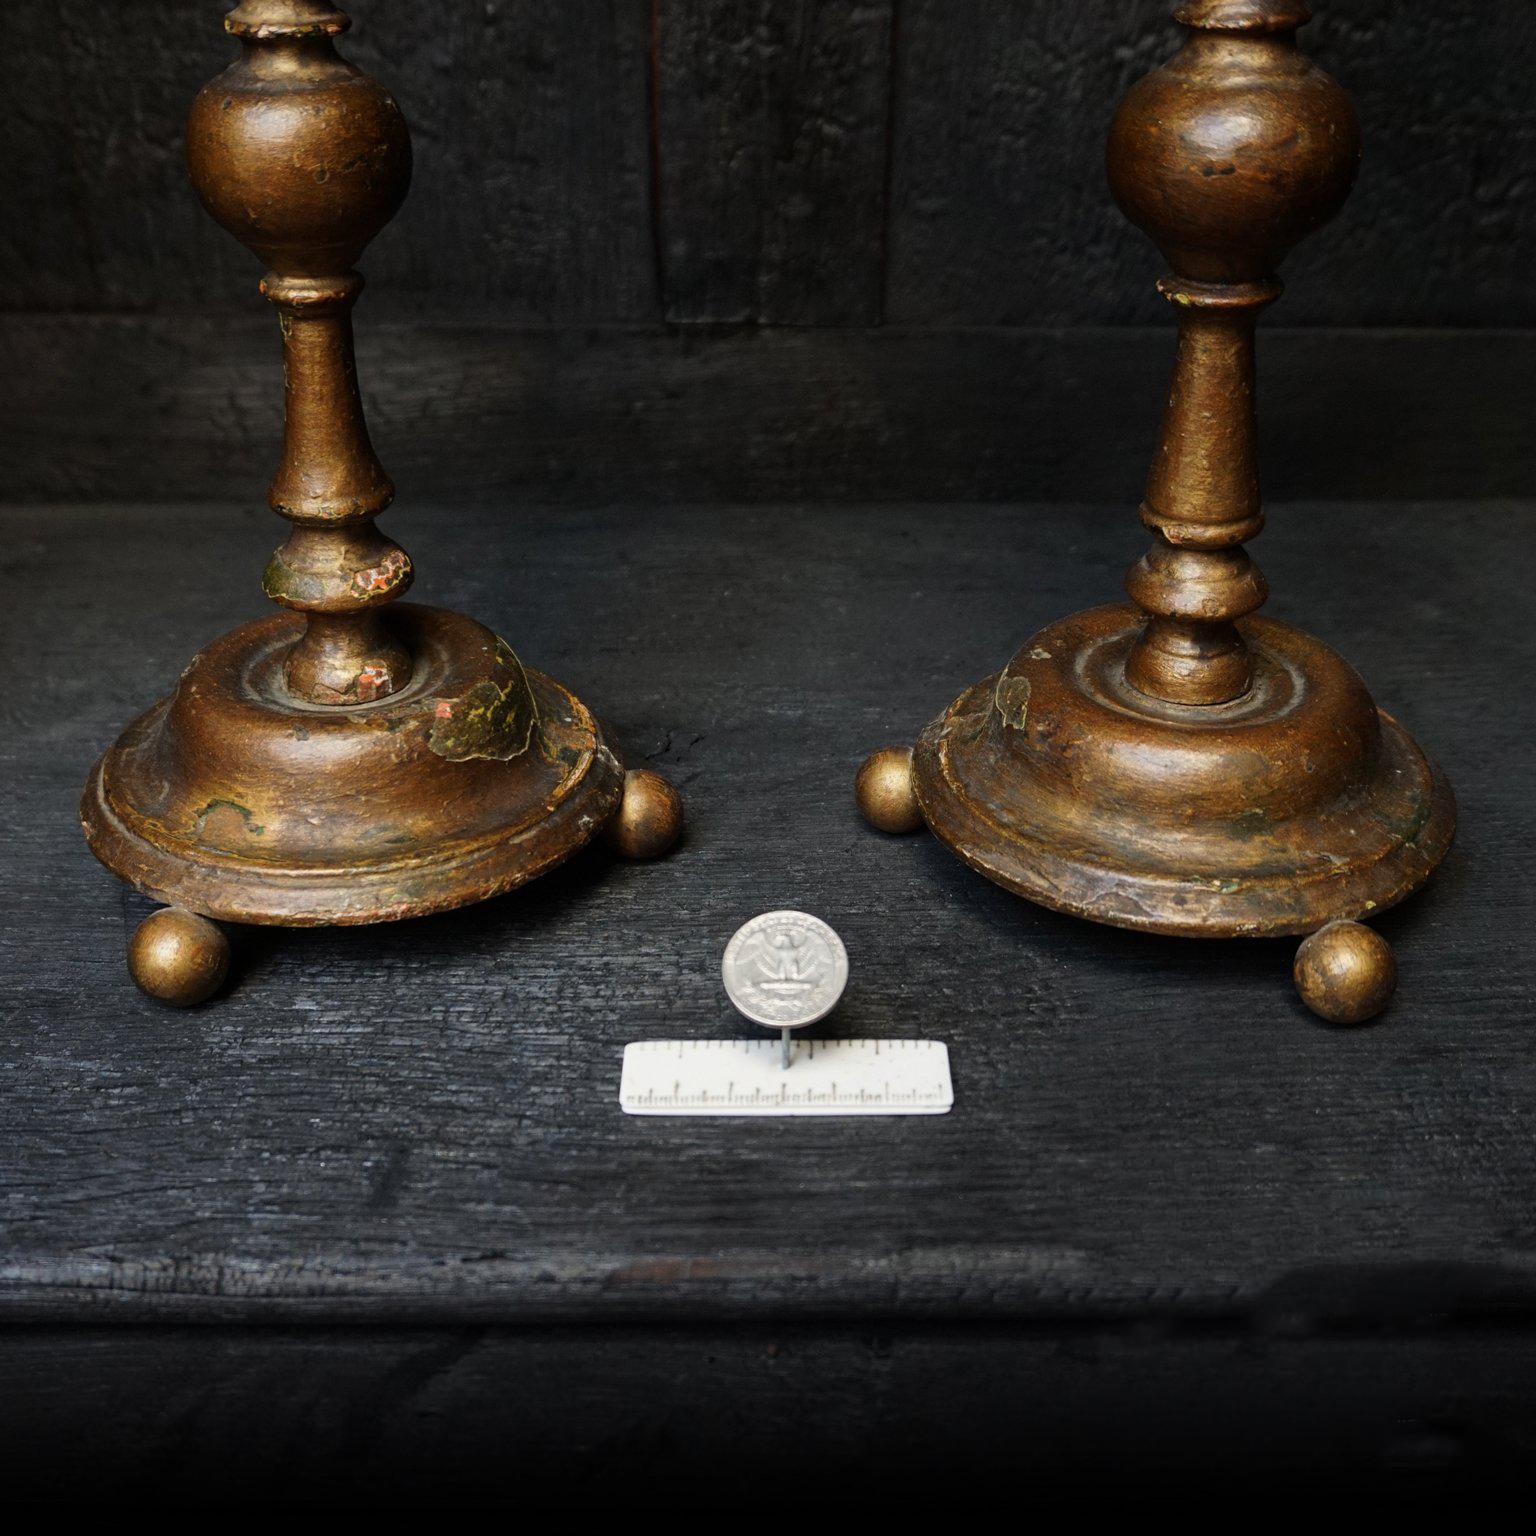 Two Large 18th C. French Polychromed Bois Doré or Gold Painted Wood Candlesticks In Good Condition For Sale In Haarlem, NL